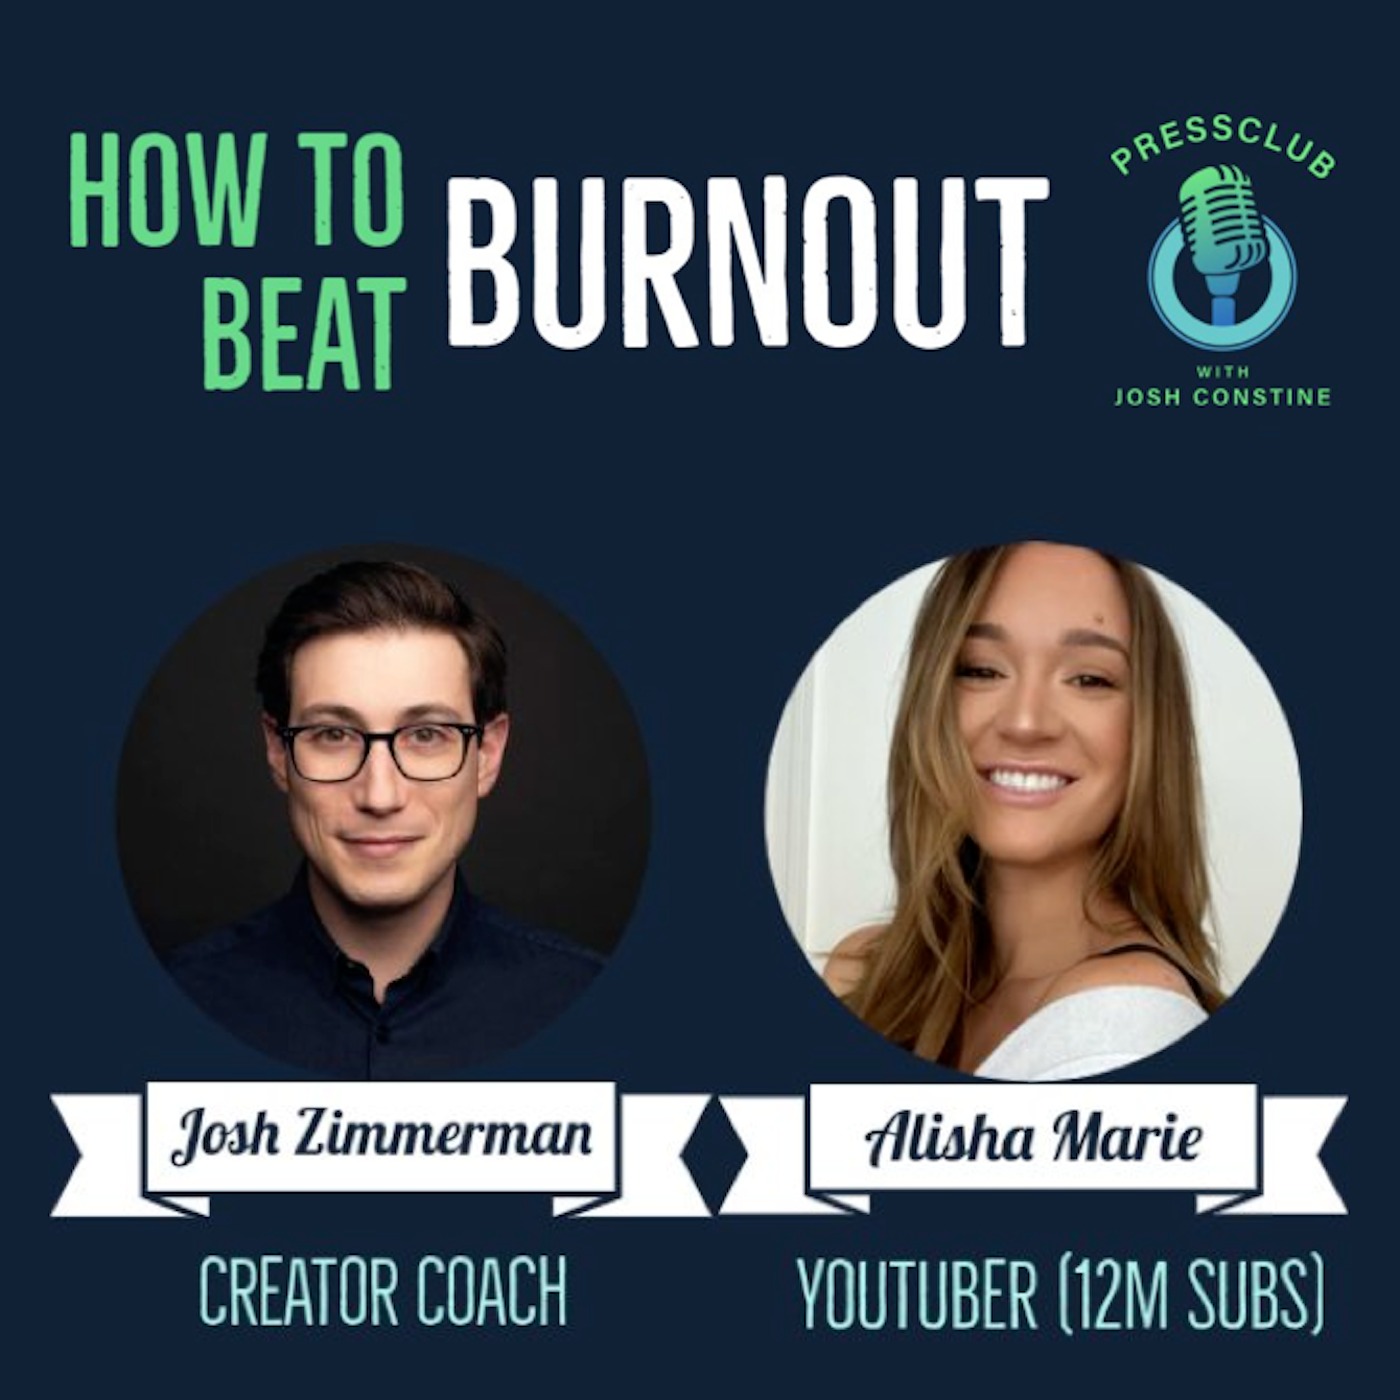 How To Beat Burnout: The 21st Century Workplace Injury